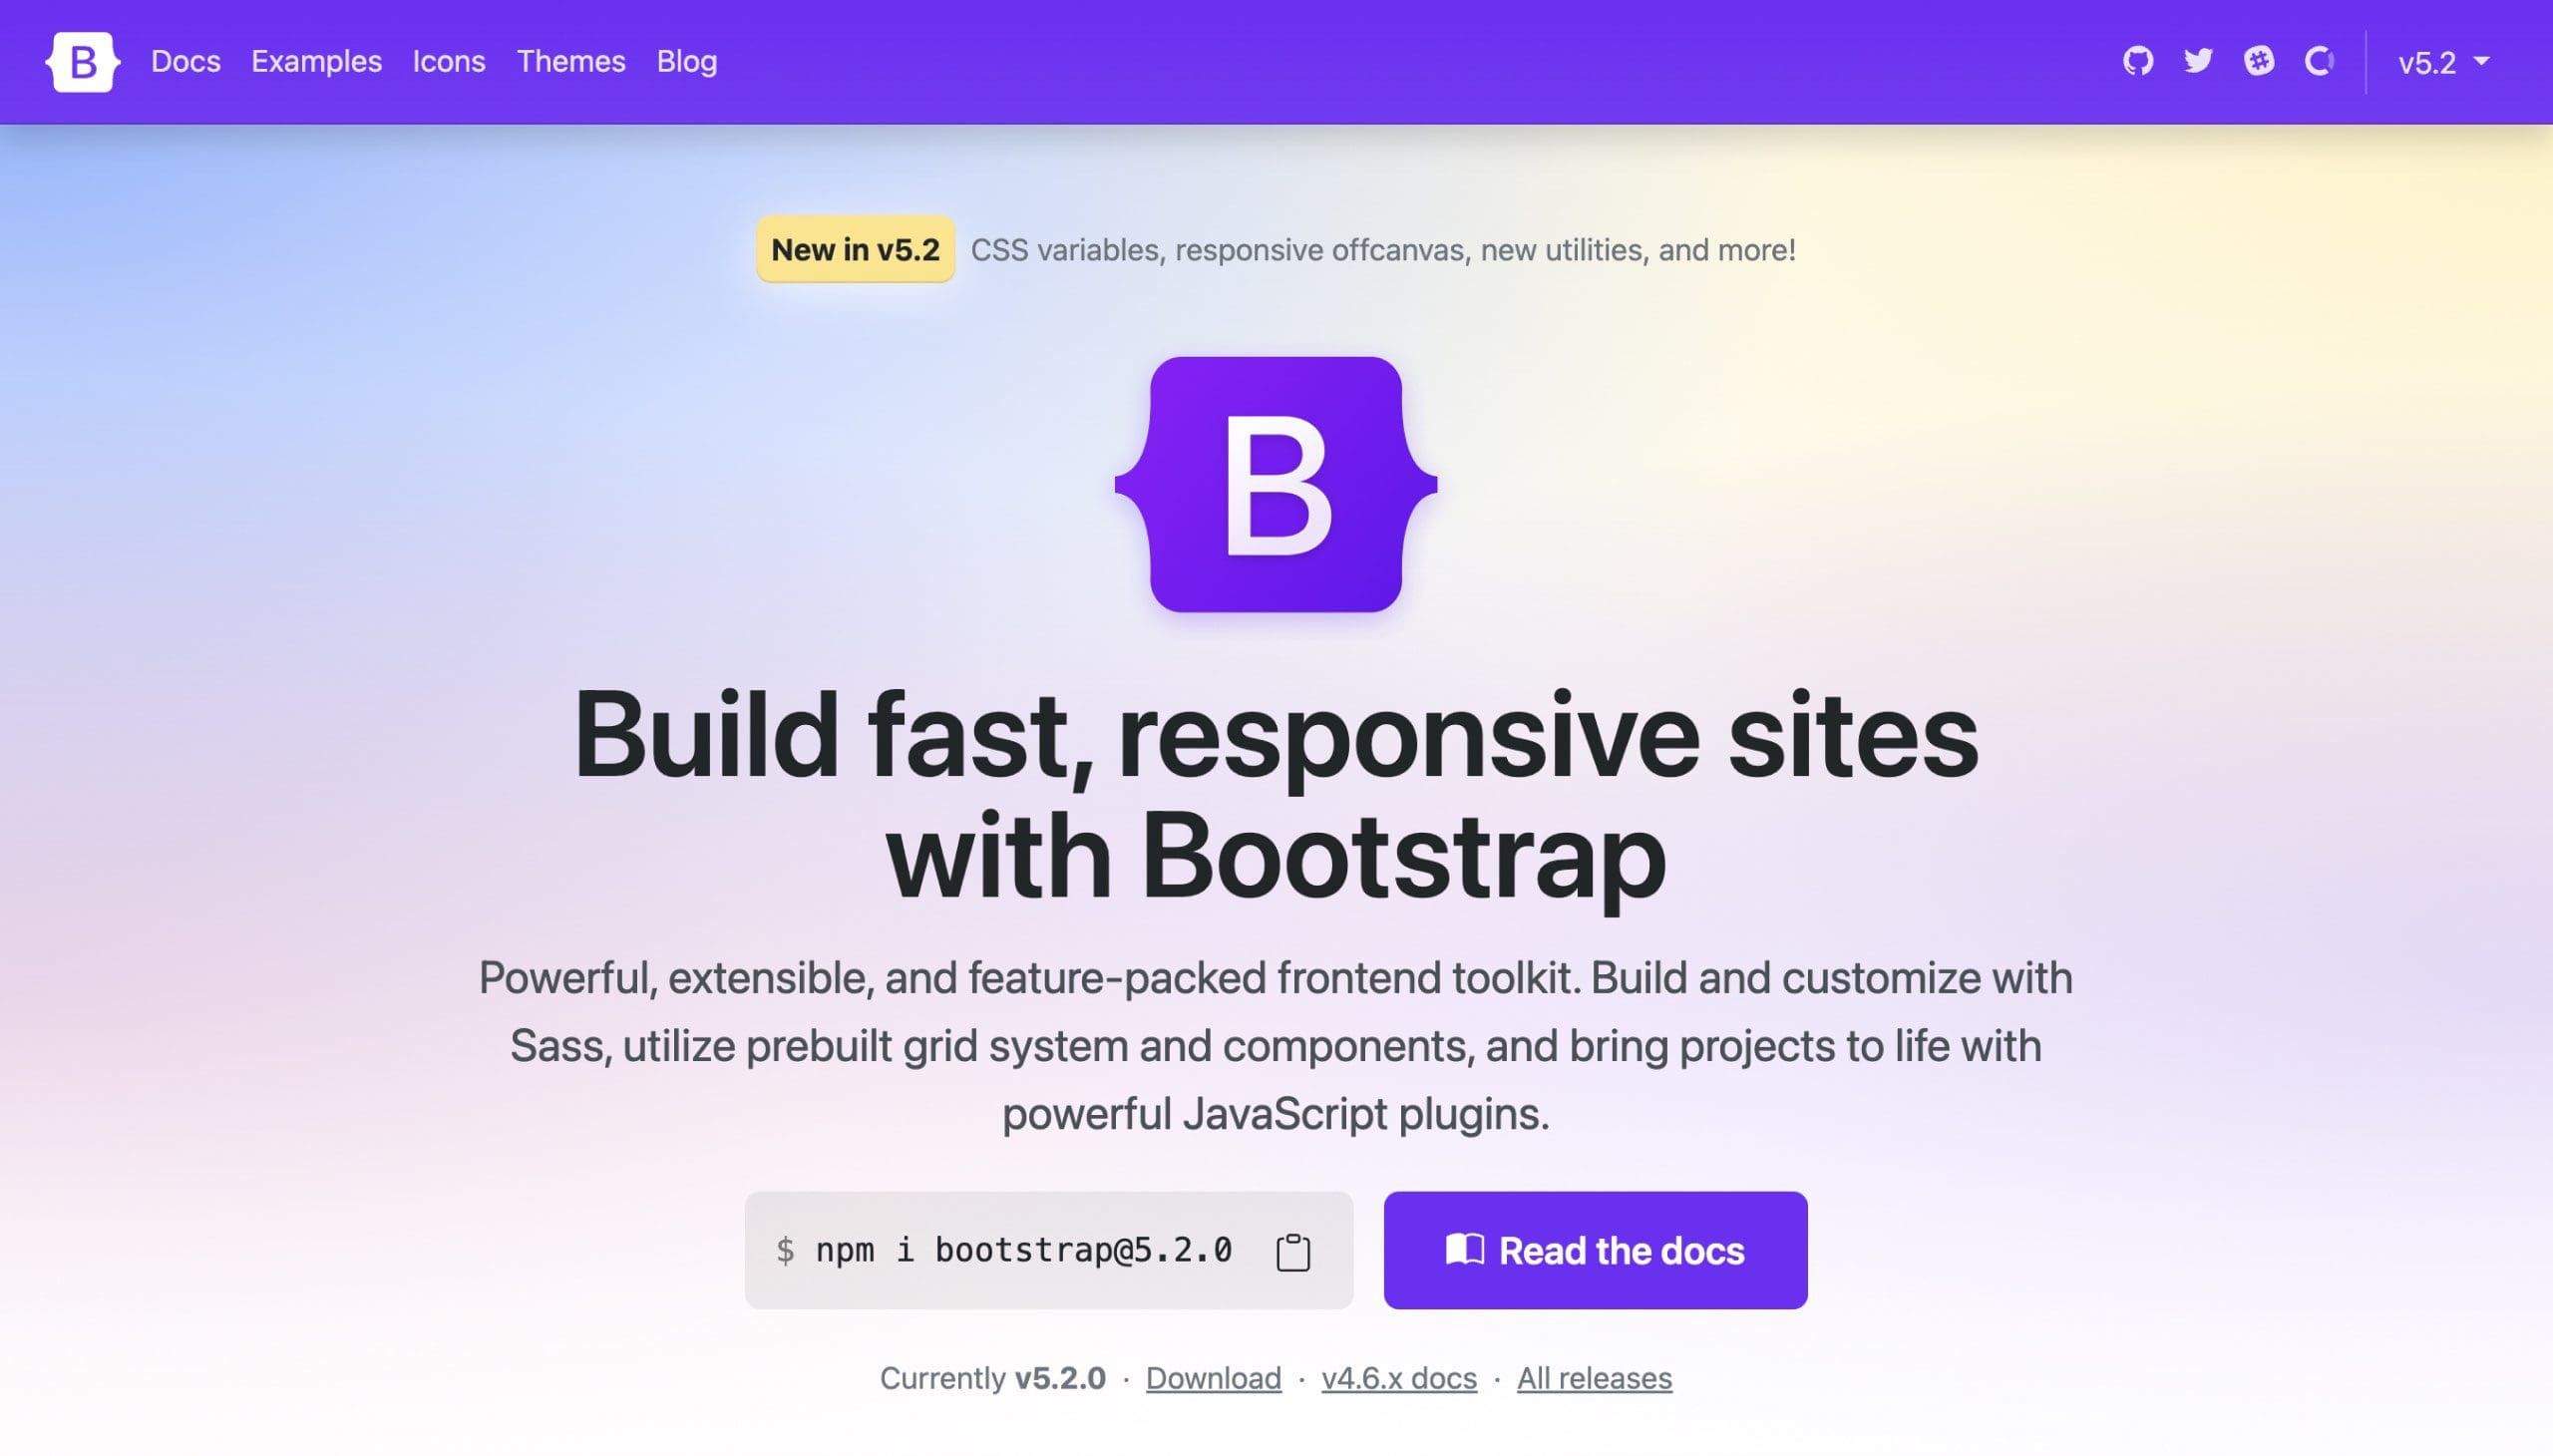 PSD to Bootstrap